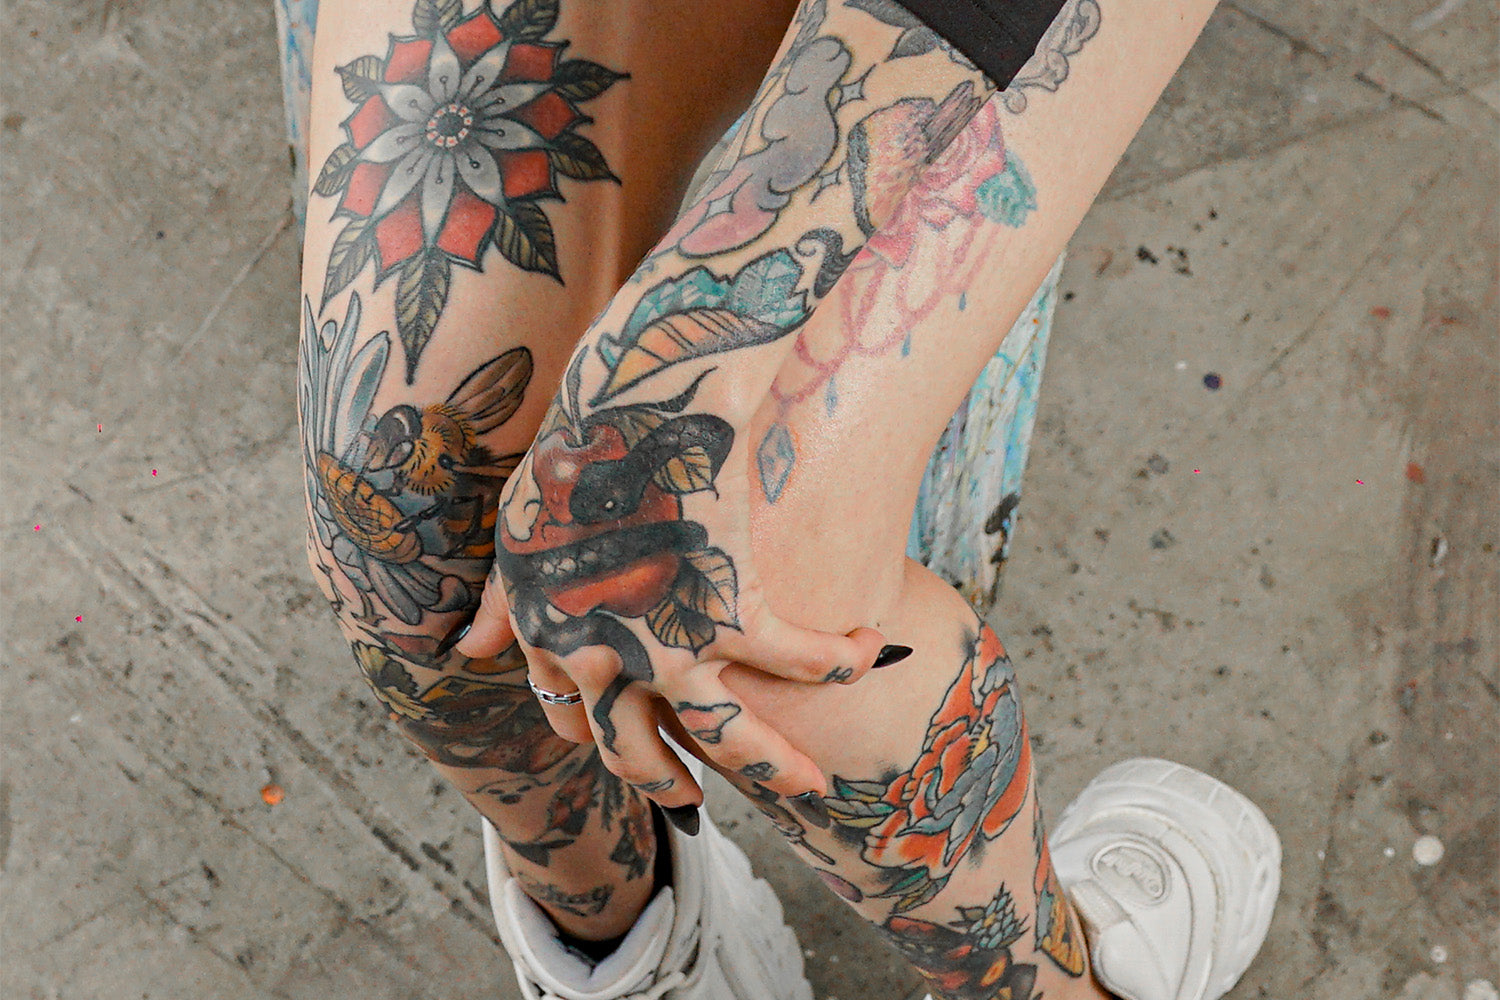 Why patchwork tattoo sleeves are all the rage